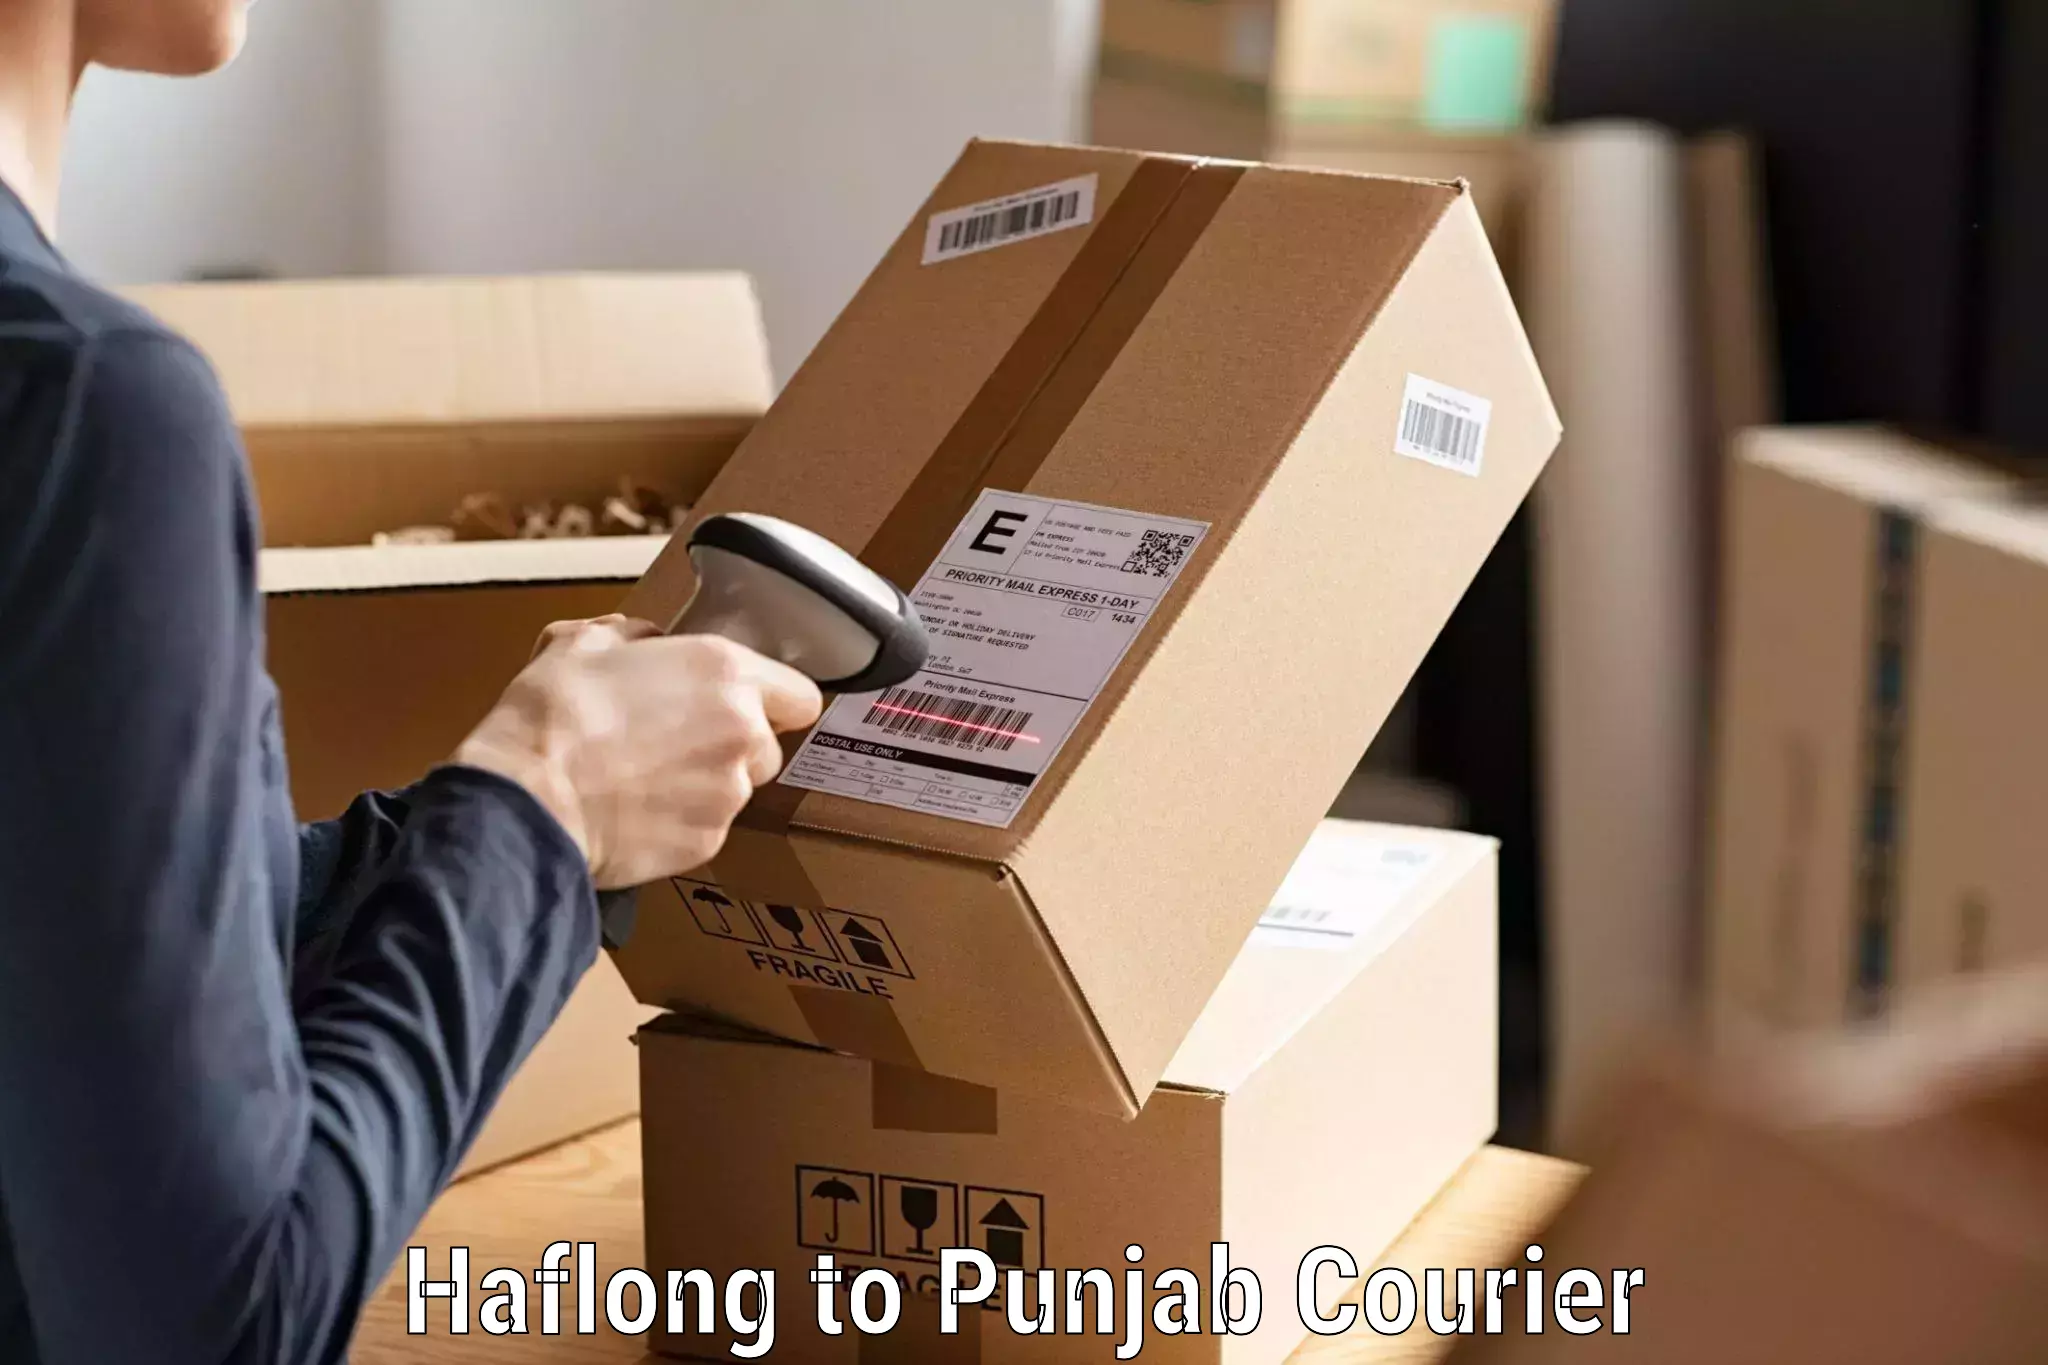 State-of-the-art courier technology Haflong to Nawanshahr